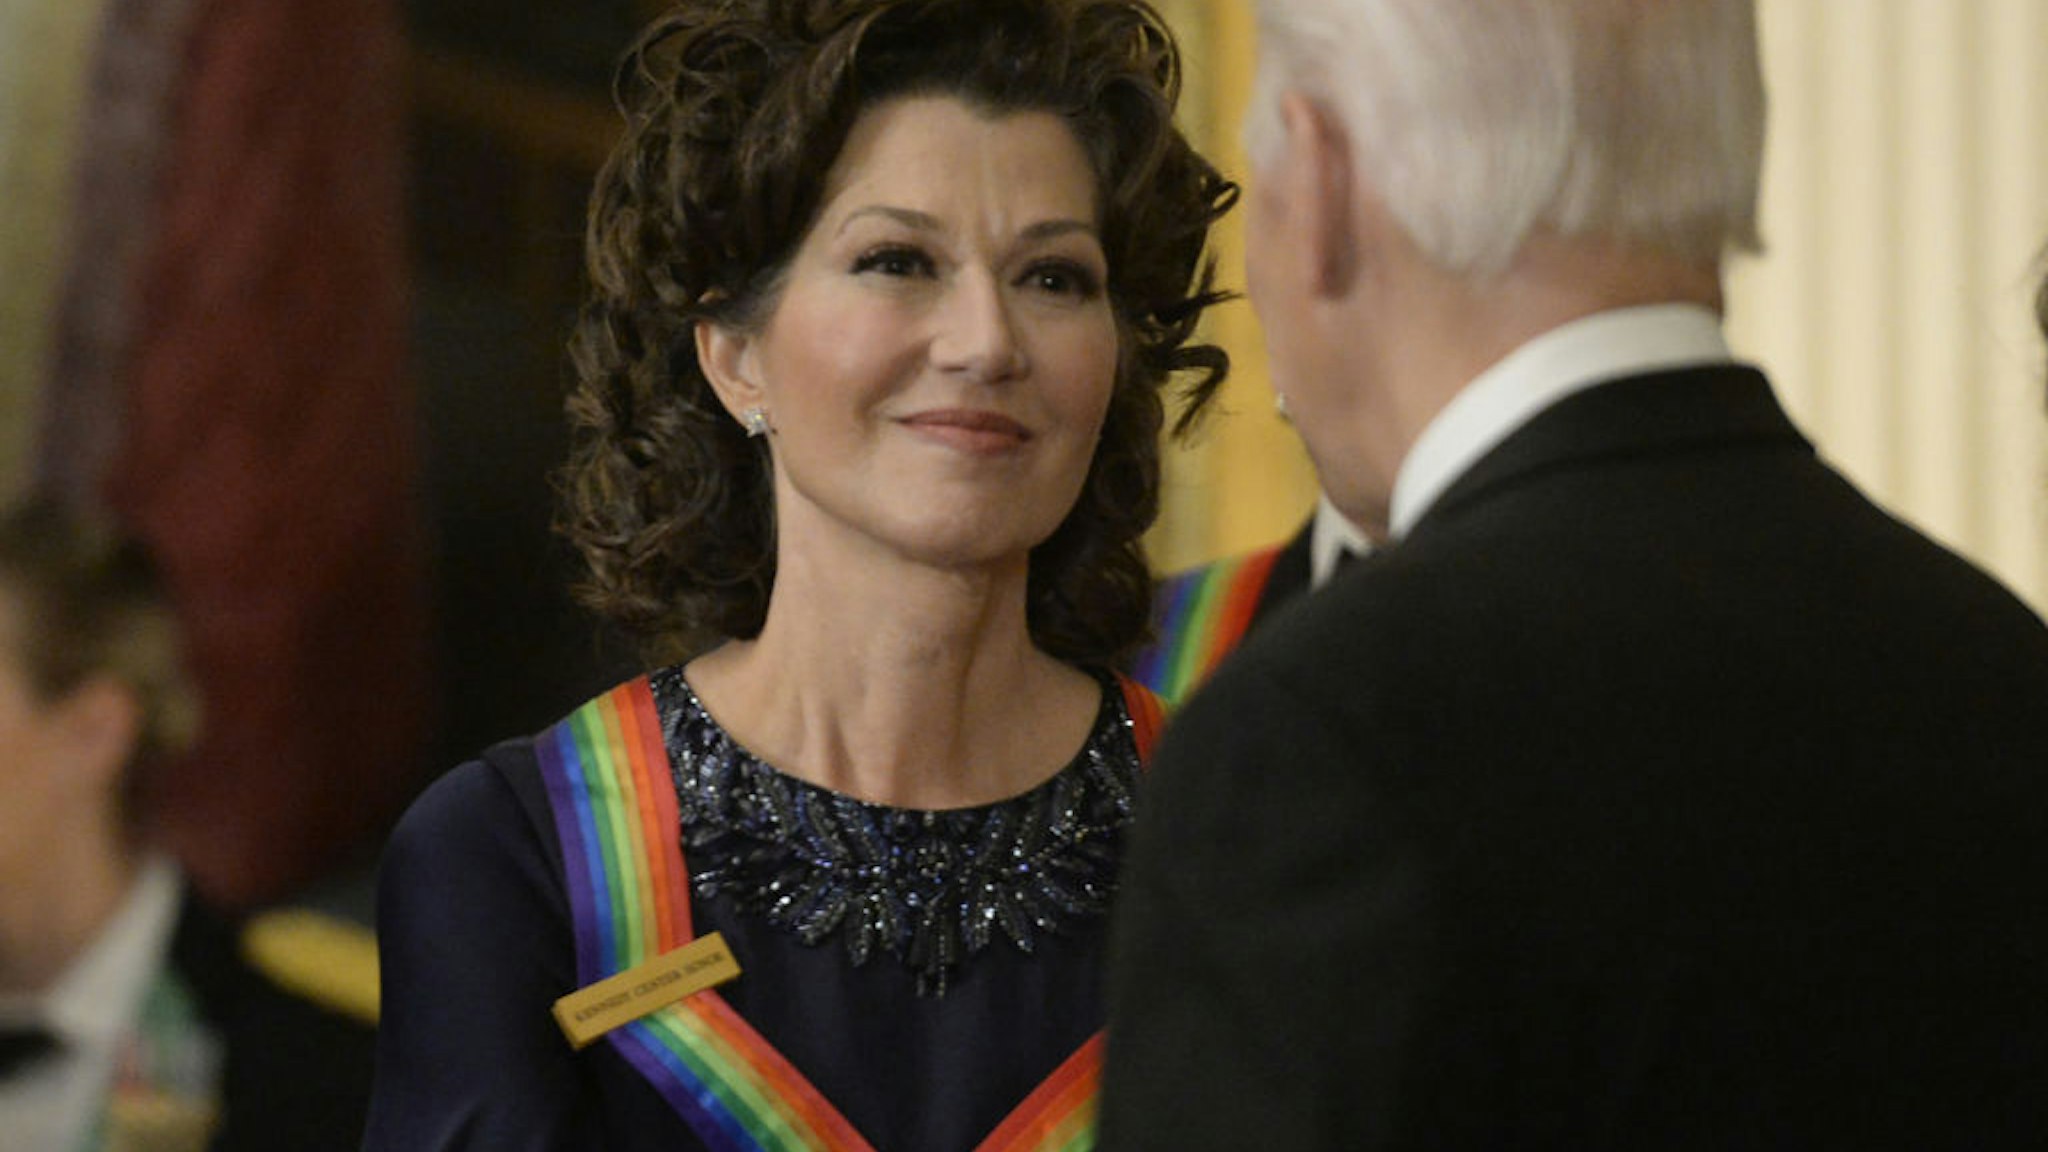 US President Joe Biden, right, greets musician Amy Grant during the Kennedy Center honoree reception in the East Room of the White House in Washington, DC, US, on Sunday, Dec, 4, 2022. The John F. Kennedy Center for the Performing Arts 45th honorees for lifetime artistic achievements include actor and filmmaker George Clooney, contemporary Christian singer-songwriter Amy Grant, singer Gladys Knight, composer and conductor Tania Leon and Irish rock band U2. Photographer: Bonnie Cash/UPI/Bloomberg via Getty Images